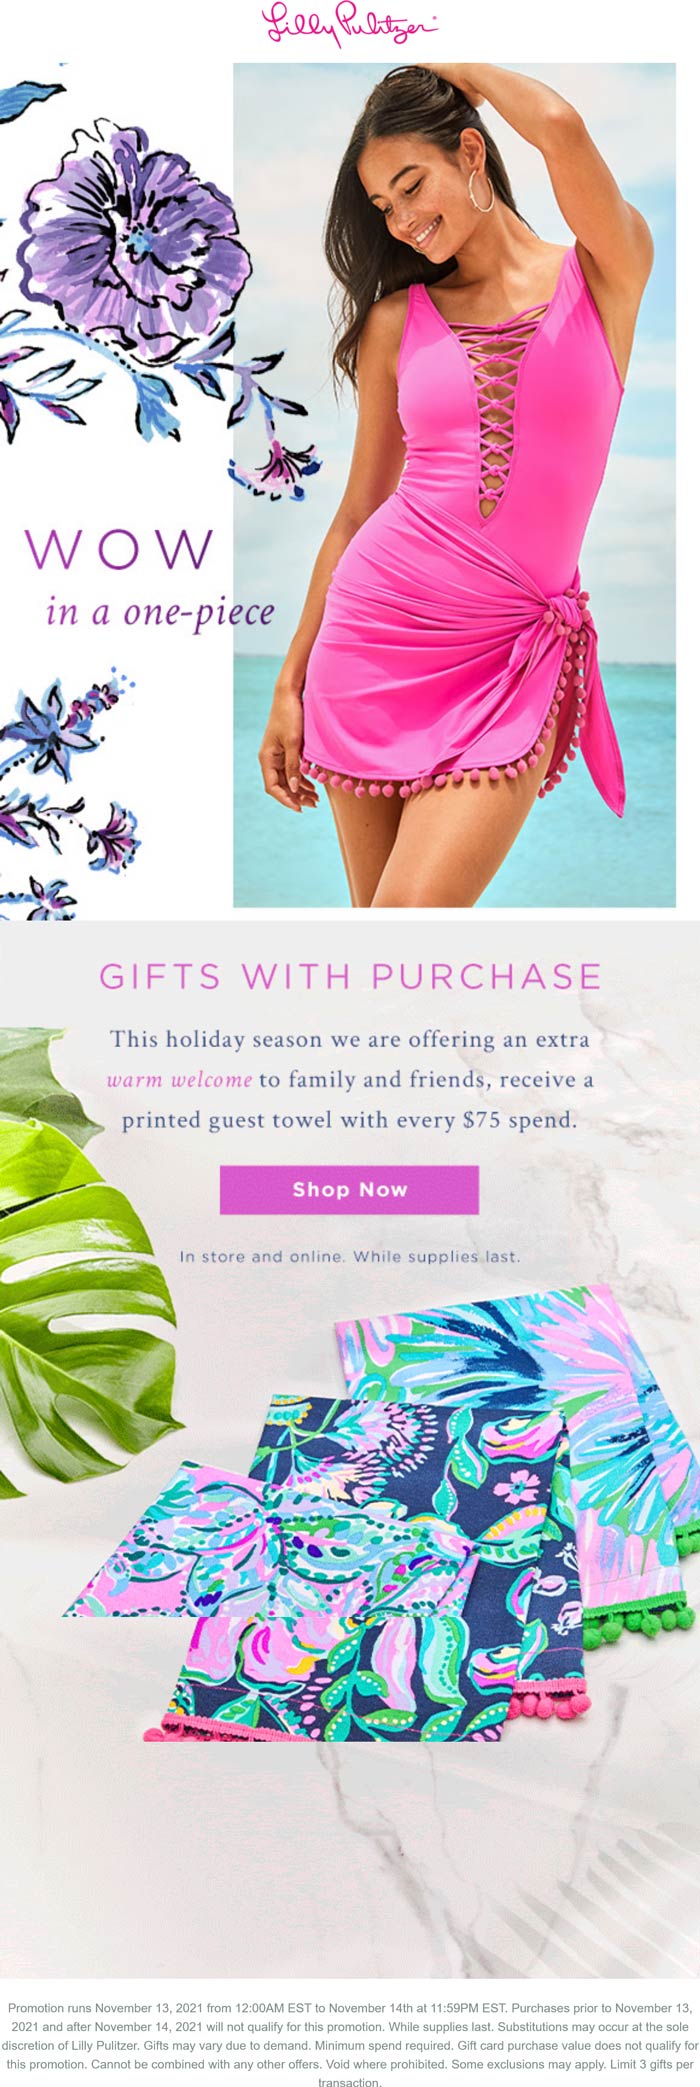 Lilly Pulitzer stores Coupon  Free towel with every $75 today at Lilly Pulitzer, ditto online #lillypulitzer 